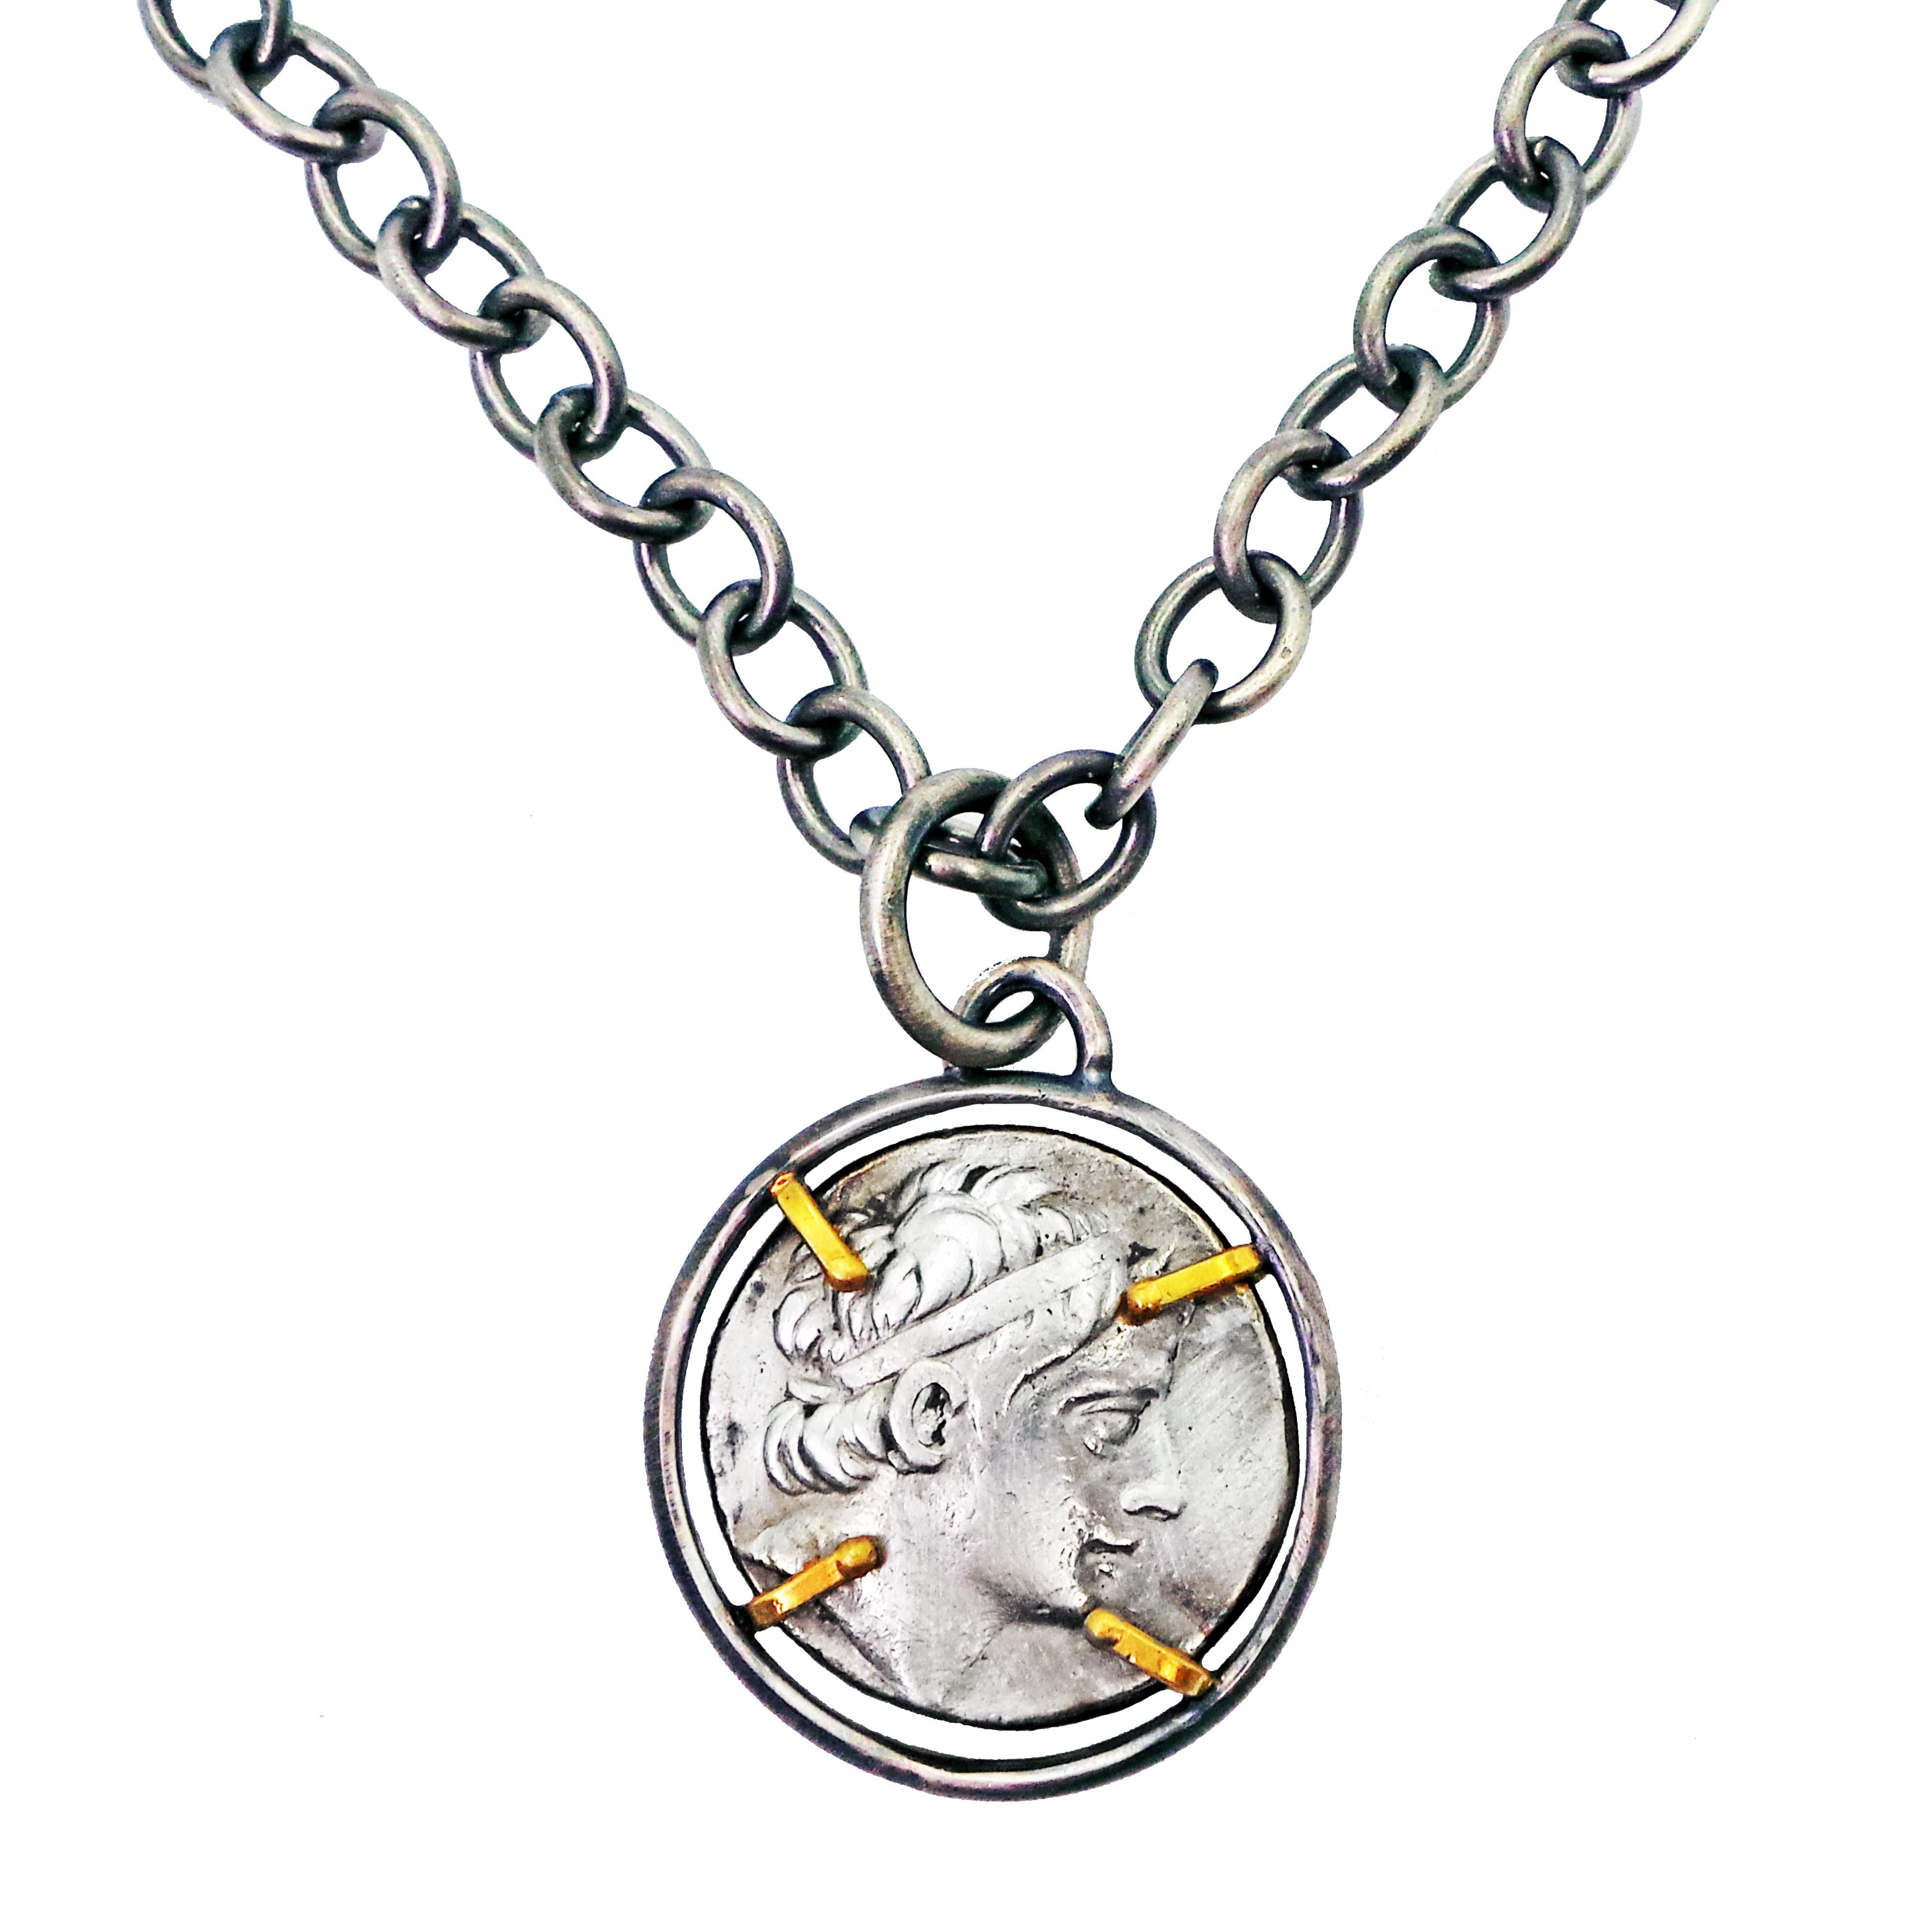 Authentic ancient Greek Tetradrachm (Antiochus III, Seleucid; 223-187 BC) silver coin set in a hand-forged sterling silver reversible pendant with 22k gold accent prongs. Pendant is on a 24 inch oxidized solid sterling silver cable chain necklace